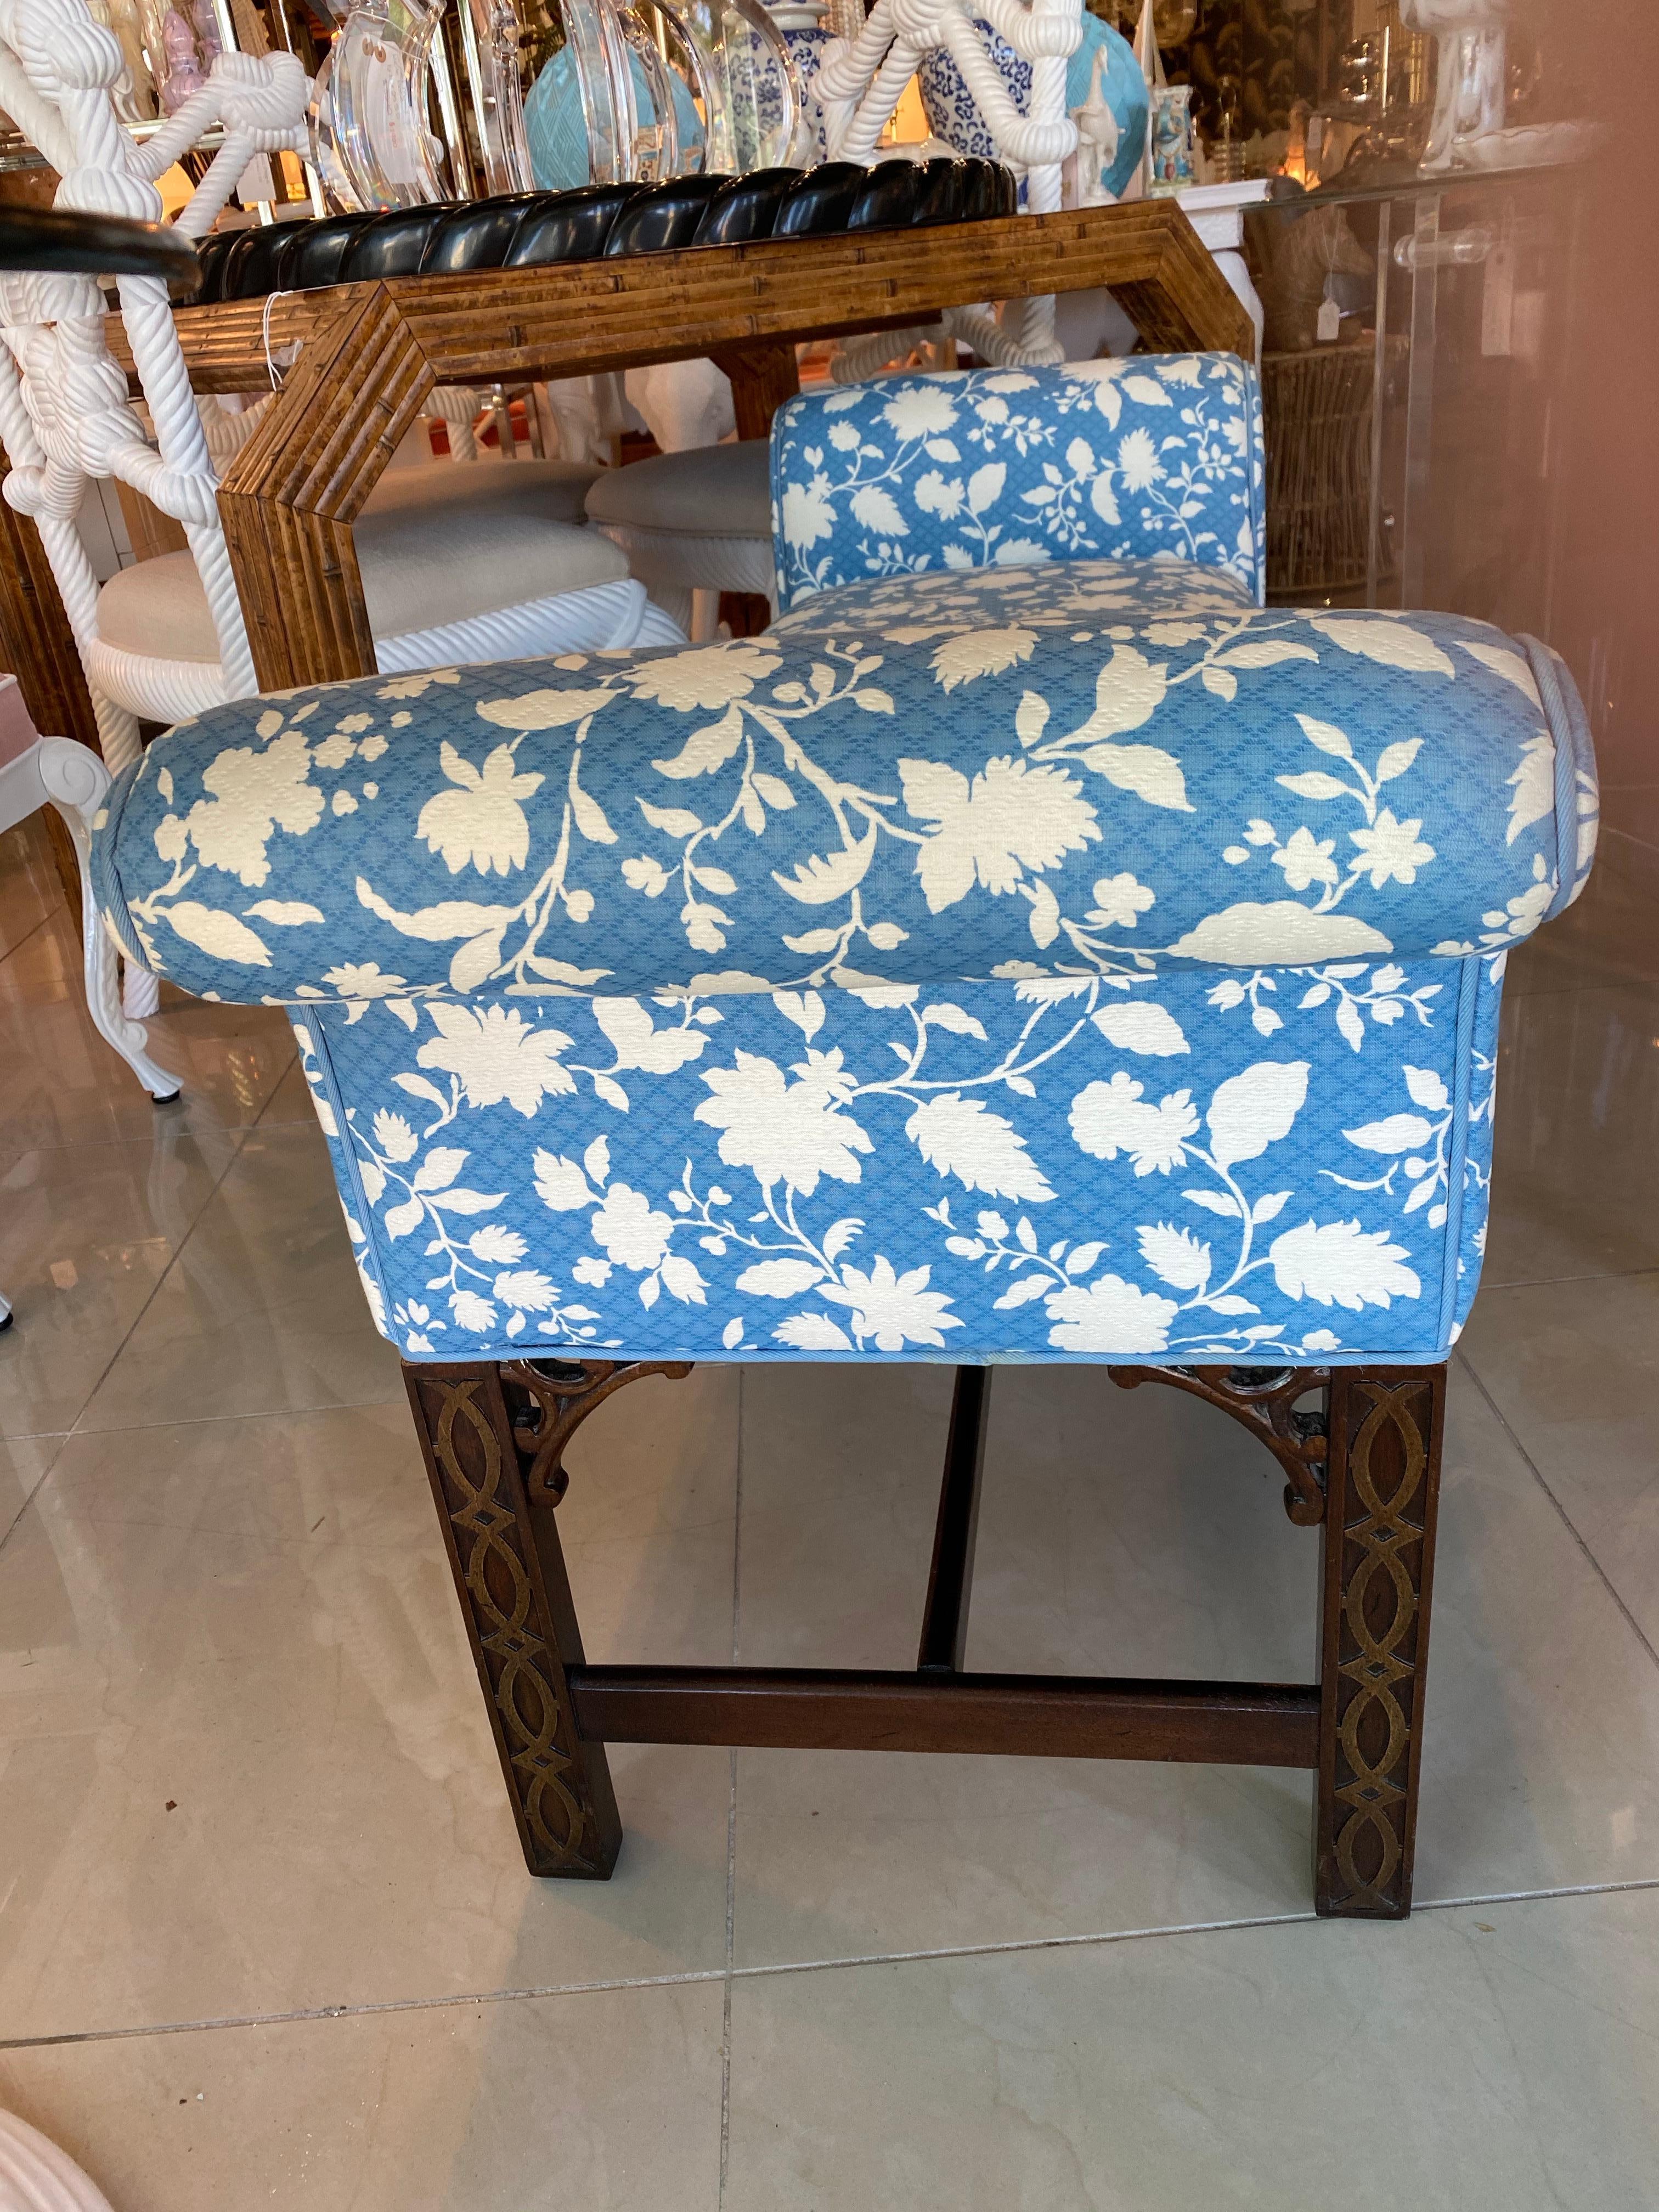 Upholstery Vintage Chinoiserie Fretwork Fret Wood Bench Blue and White